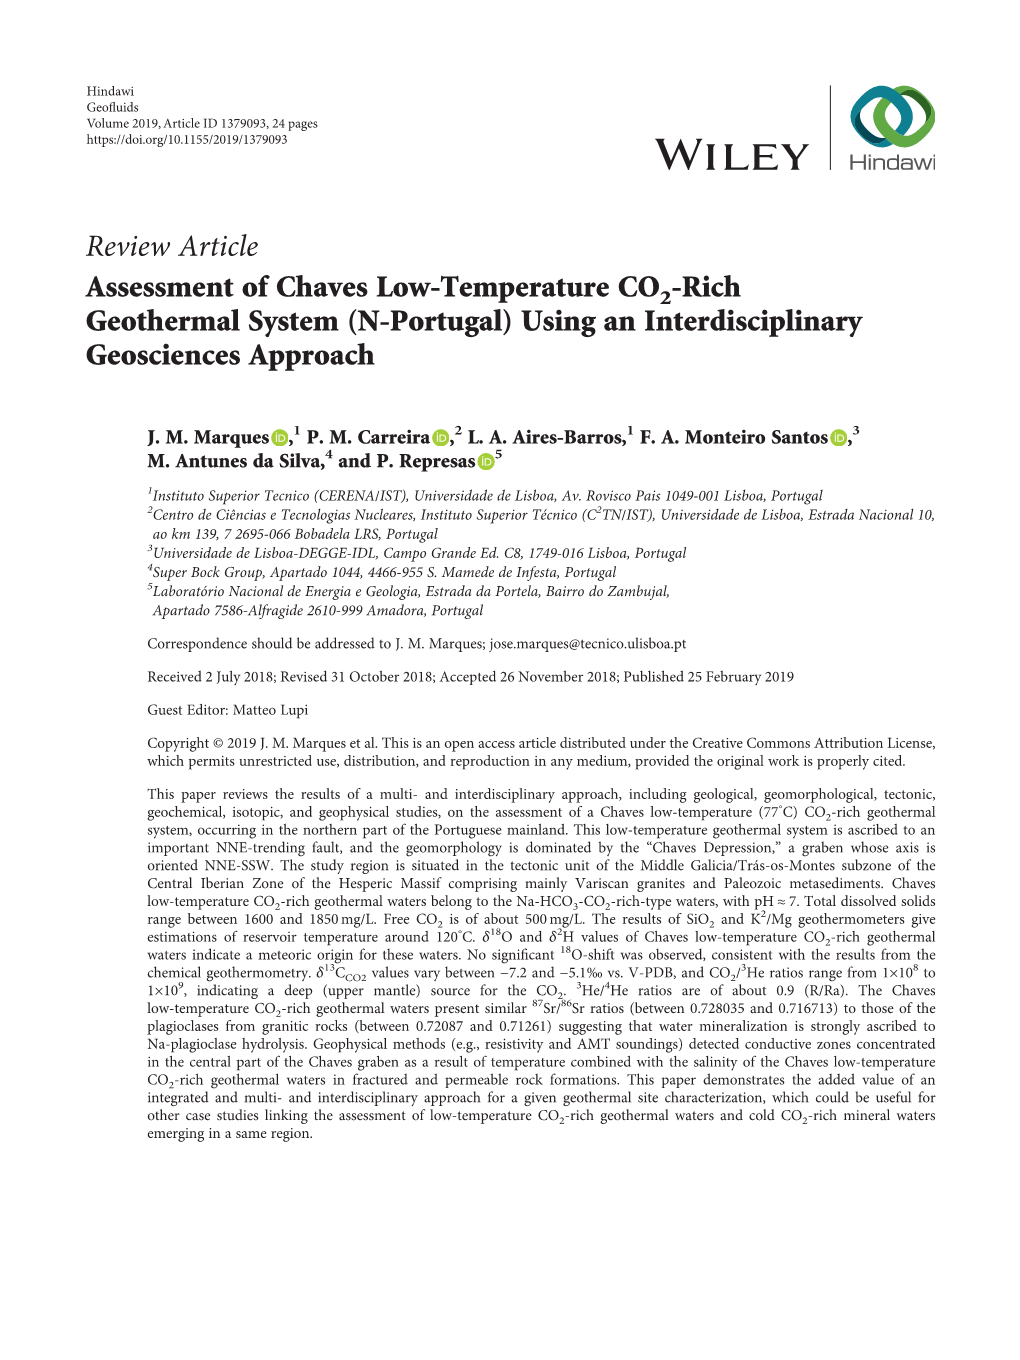 Assessment of Chaves Low-Temperature CO2-Rich Geothermal System (N-Portugal) Using an Interdisciplinary Geosciences Approach